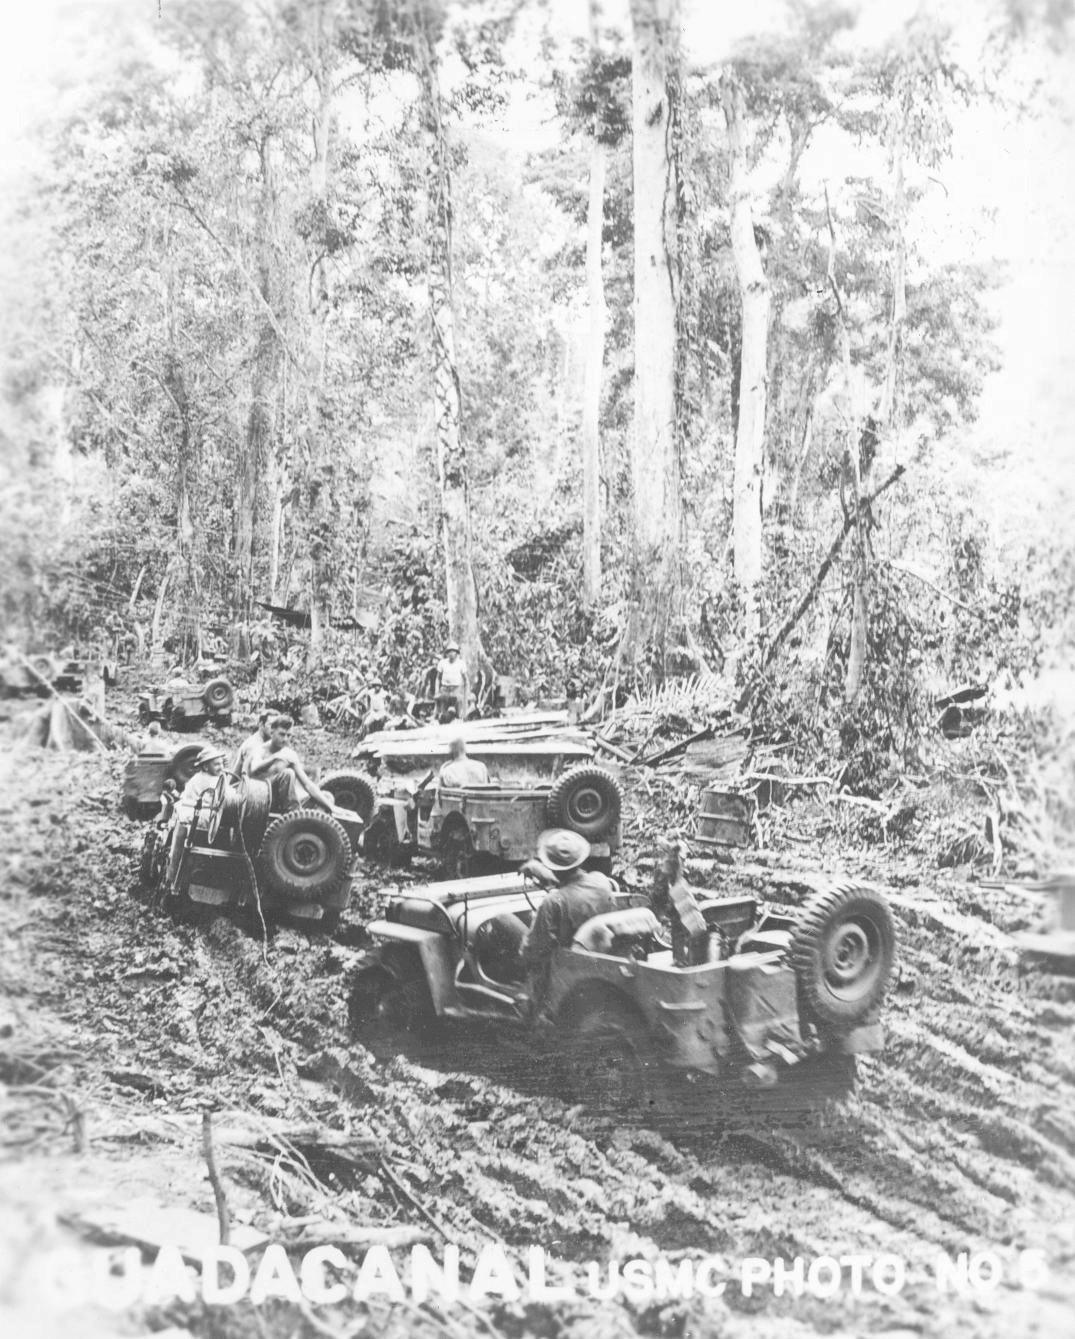 Jeeps, Guadalcanal, late 1942